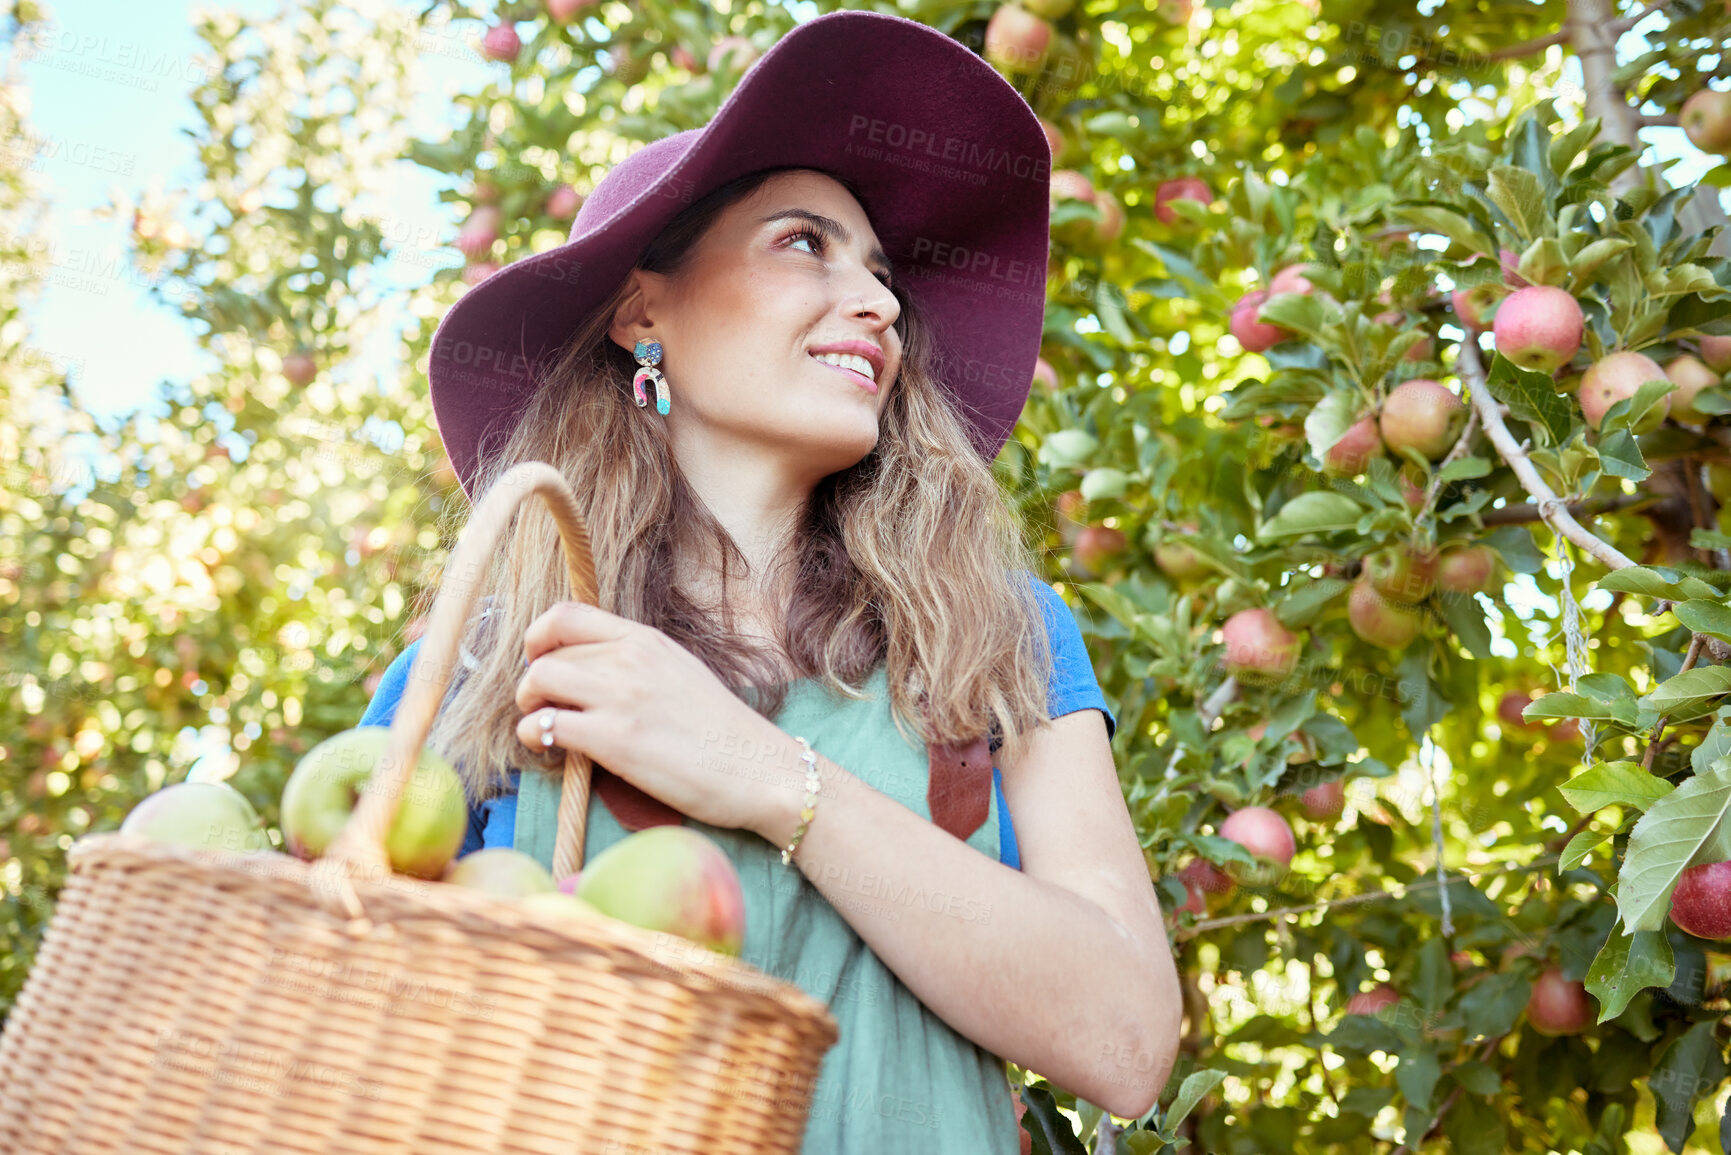 Buy stock photo Cheerful farmer harvesting juicy nutritious organic fruit in season to eat. A happy woman from below holding basket of freshly picked apples from tree on sustainable orchard farm outside on sunny day